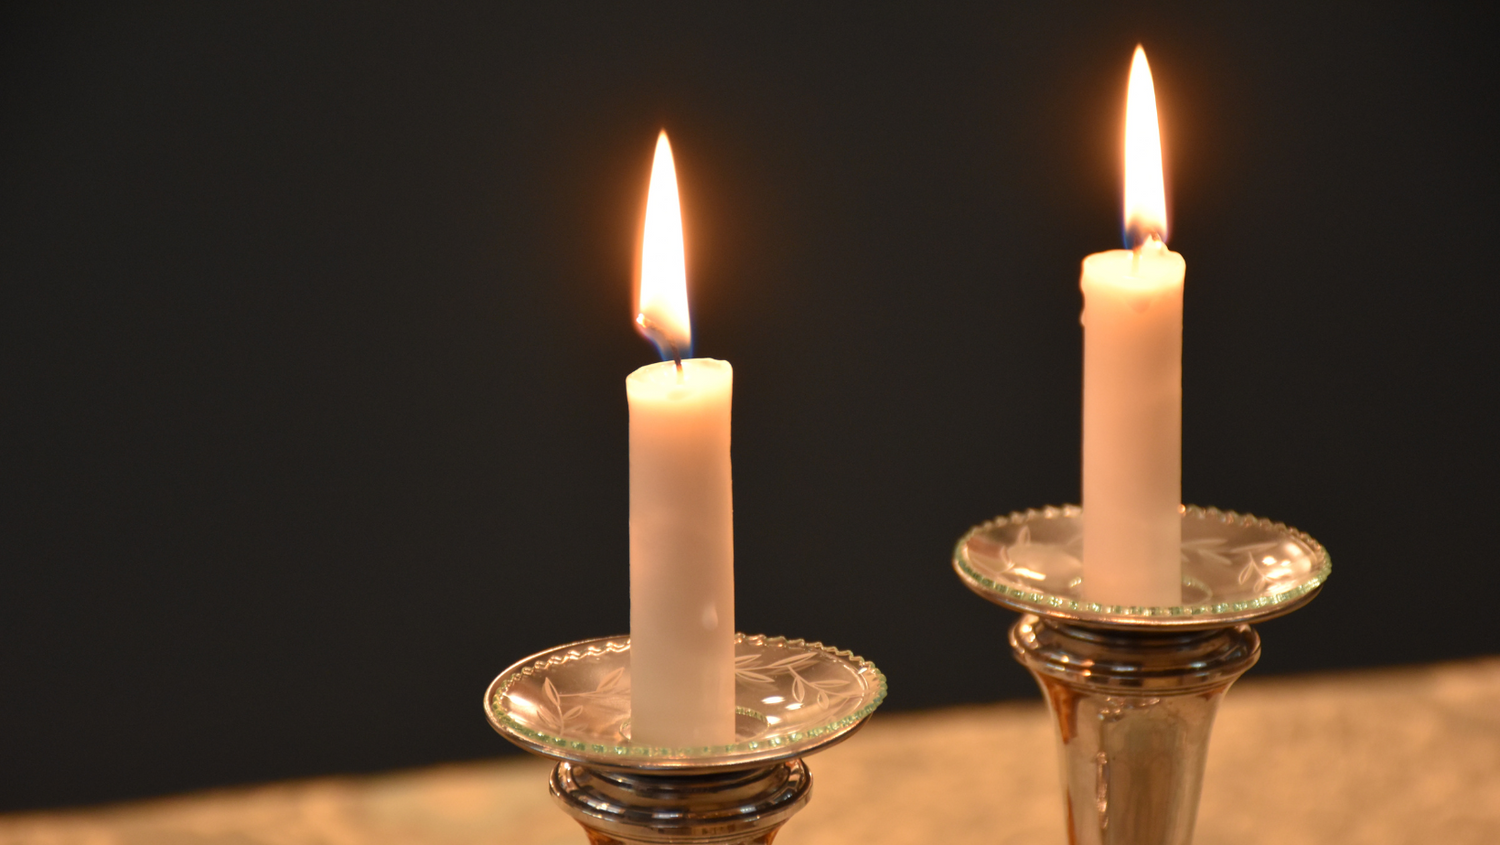 Paraffin Shabbat Candles are Harmful. Here's What to Use Instead